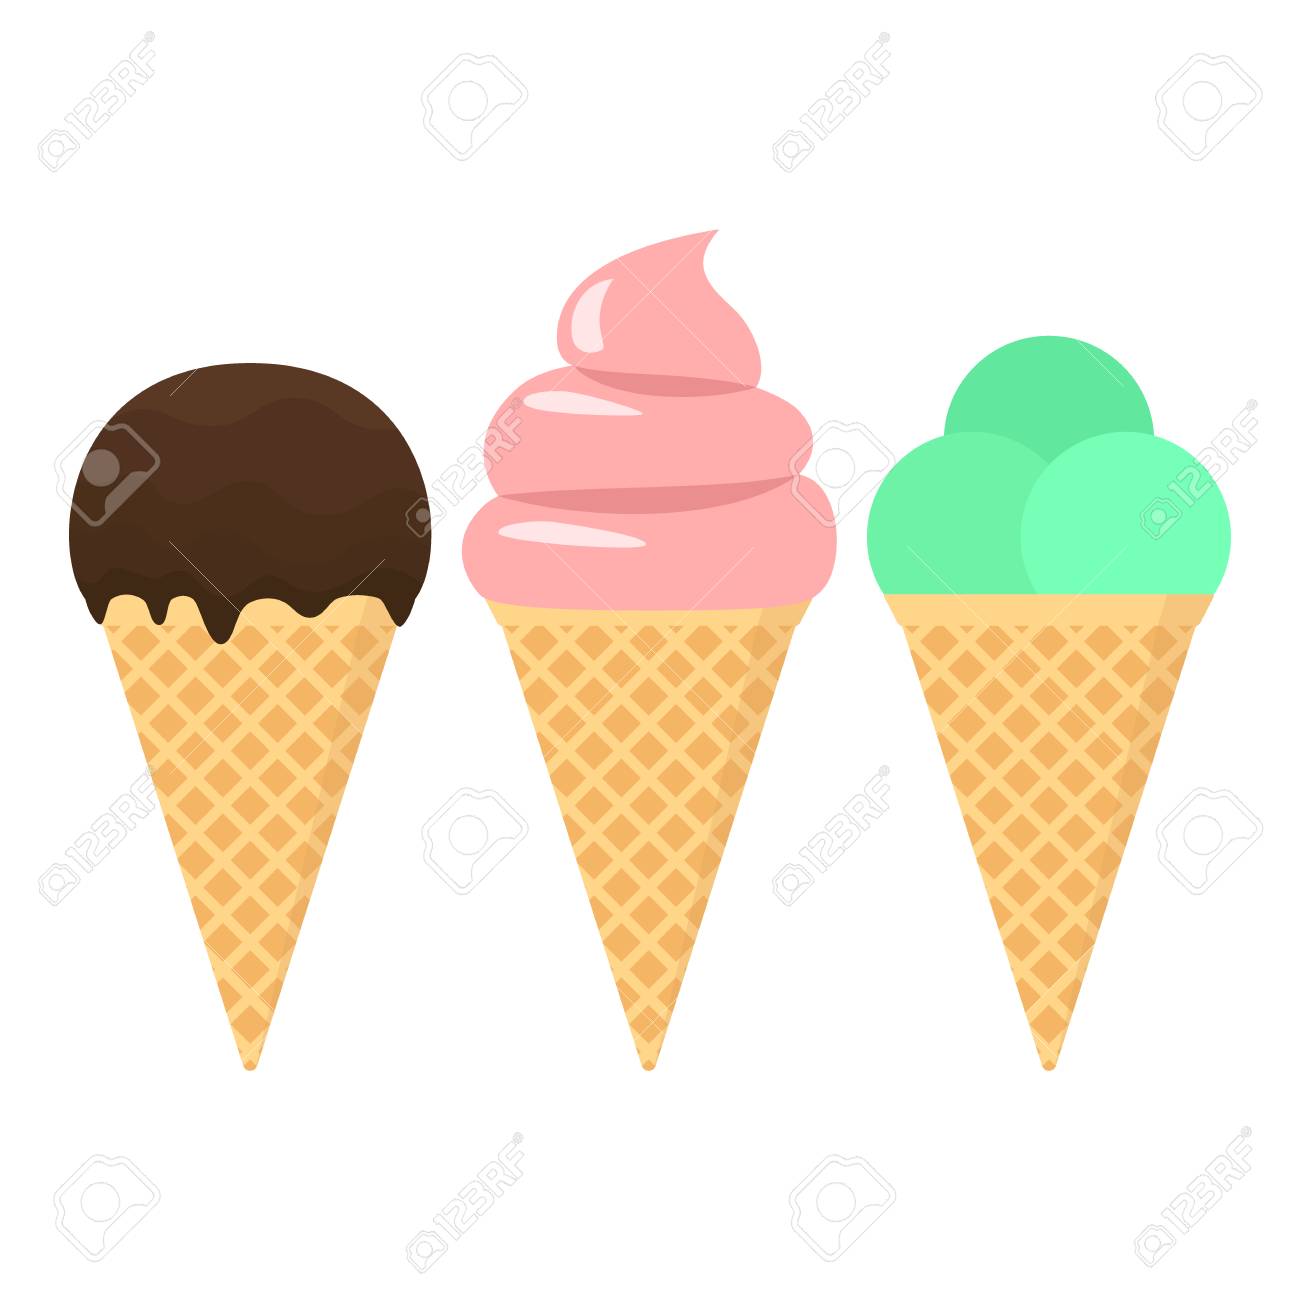 Chocolate, mint and pink ice cream vector clipart cartoon. Waffle...